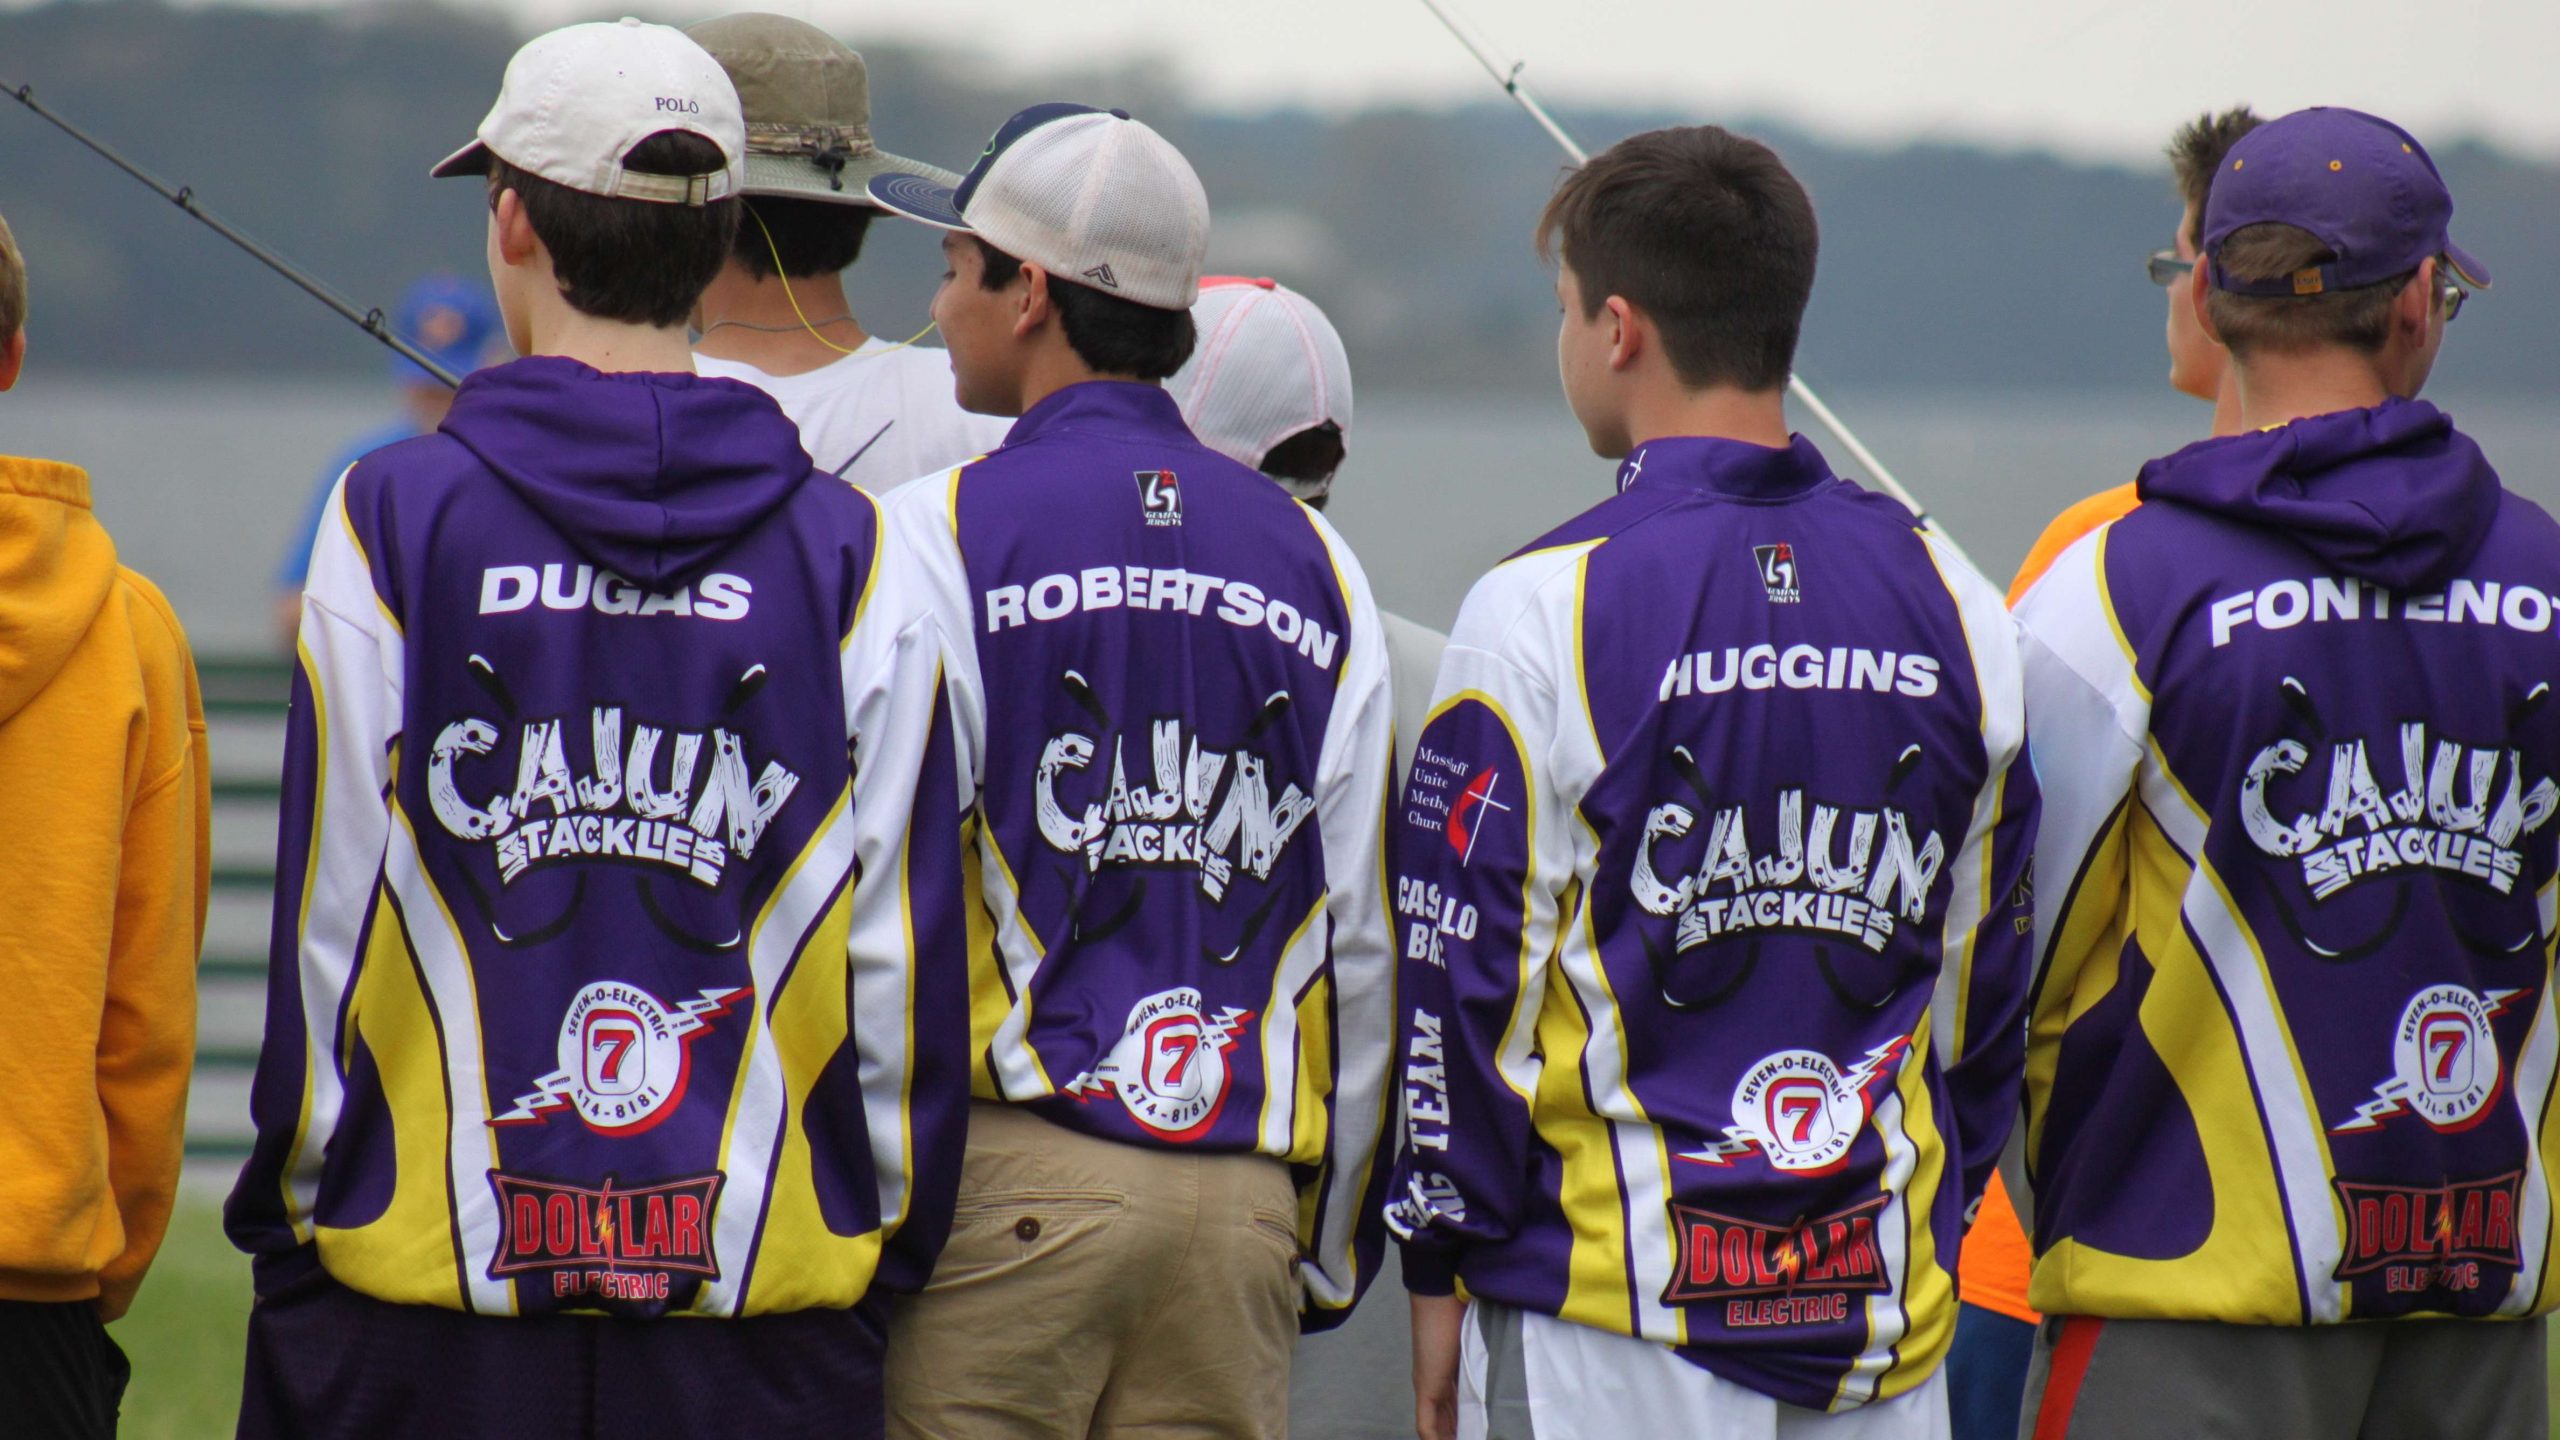 Purple and gold are popular colors in these parts, but this
isn't Team LSU. It's anglers from Sam Houston (La.) High School
watching the action at the popular Shimano station just before the
registration meeting begins.